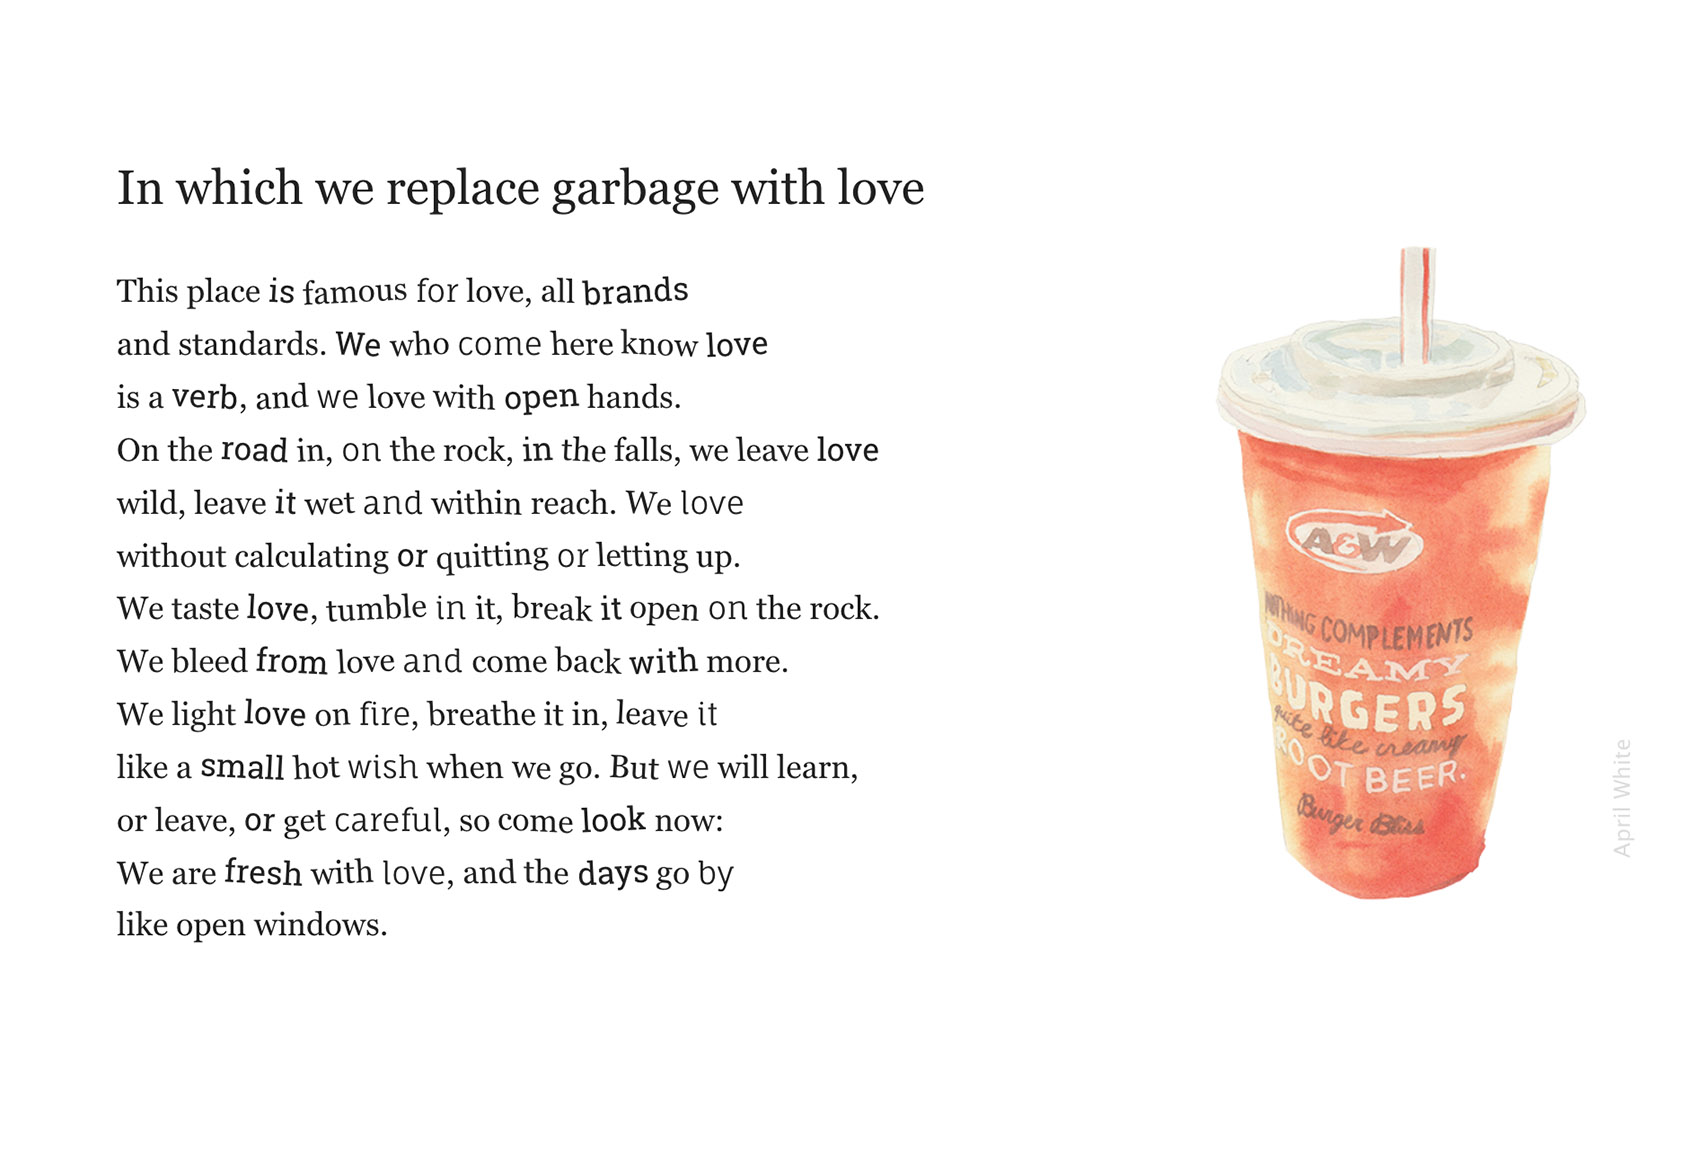 The Garbage Poems